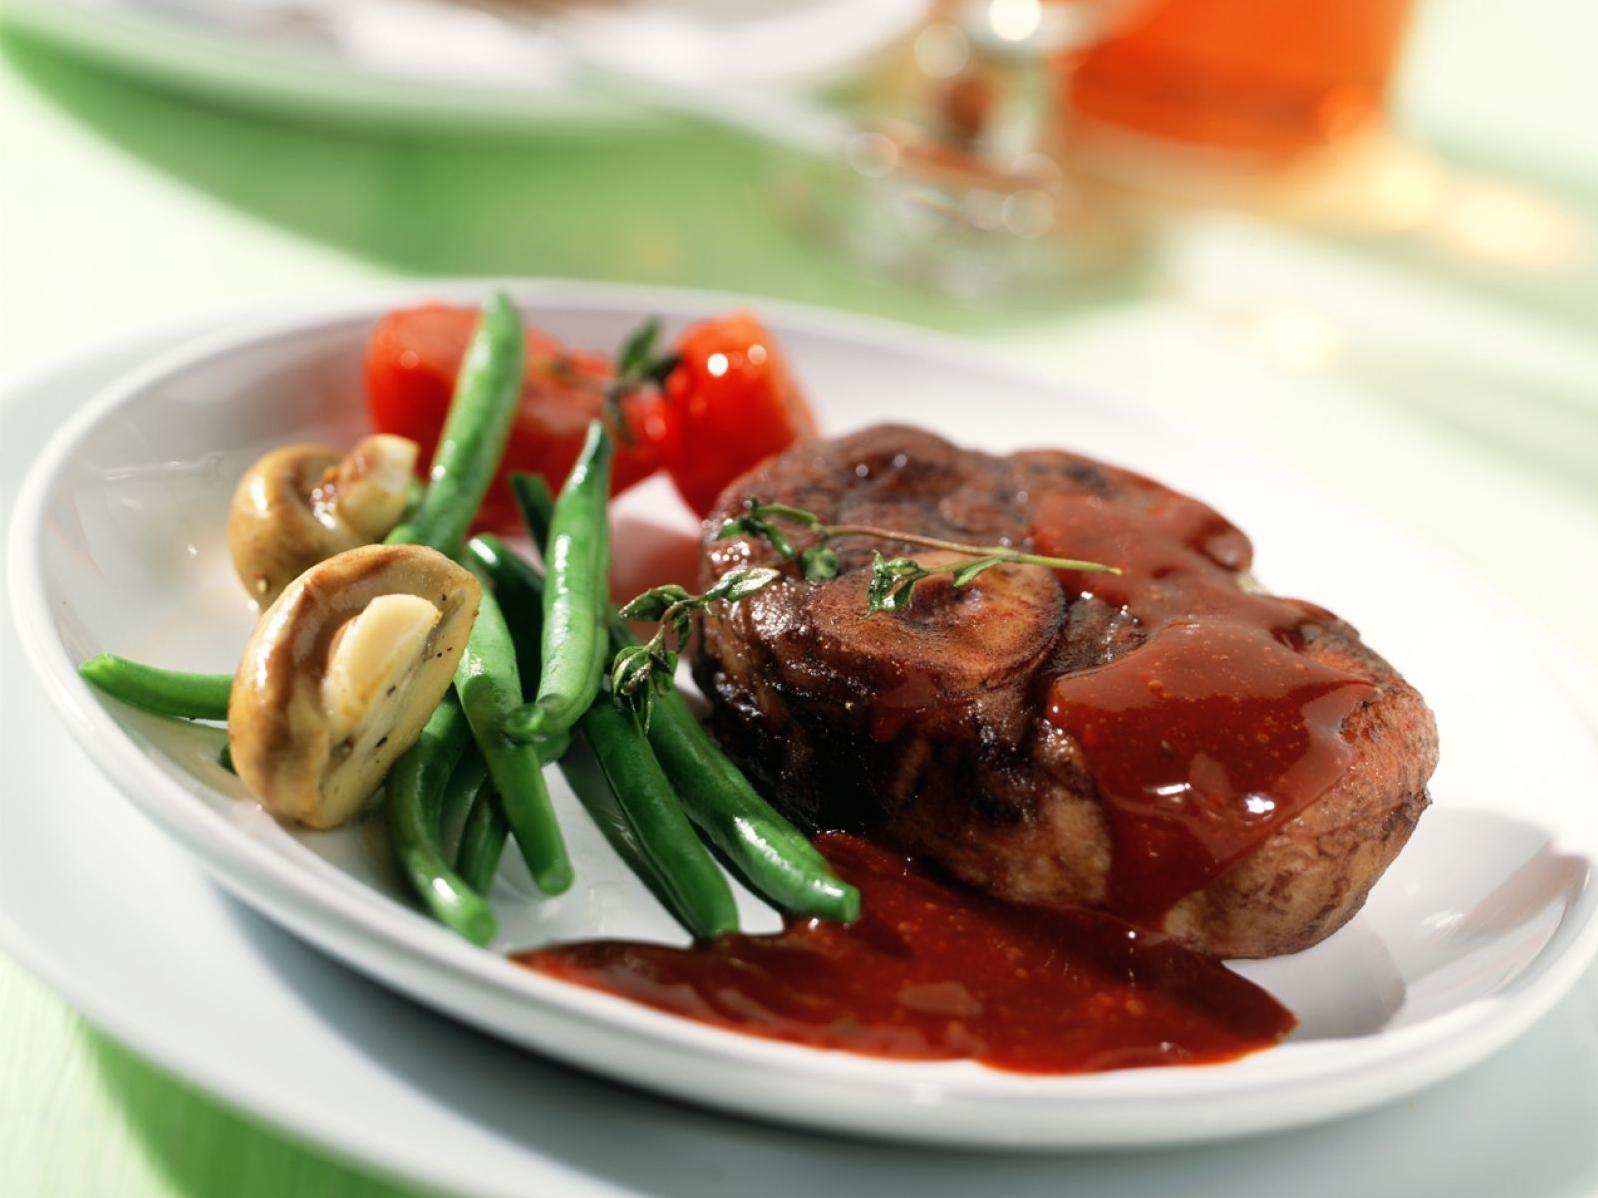  Juicy and tender veal cutlets bathed in a robust red wine sauce.